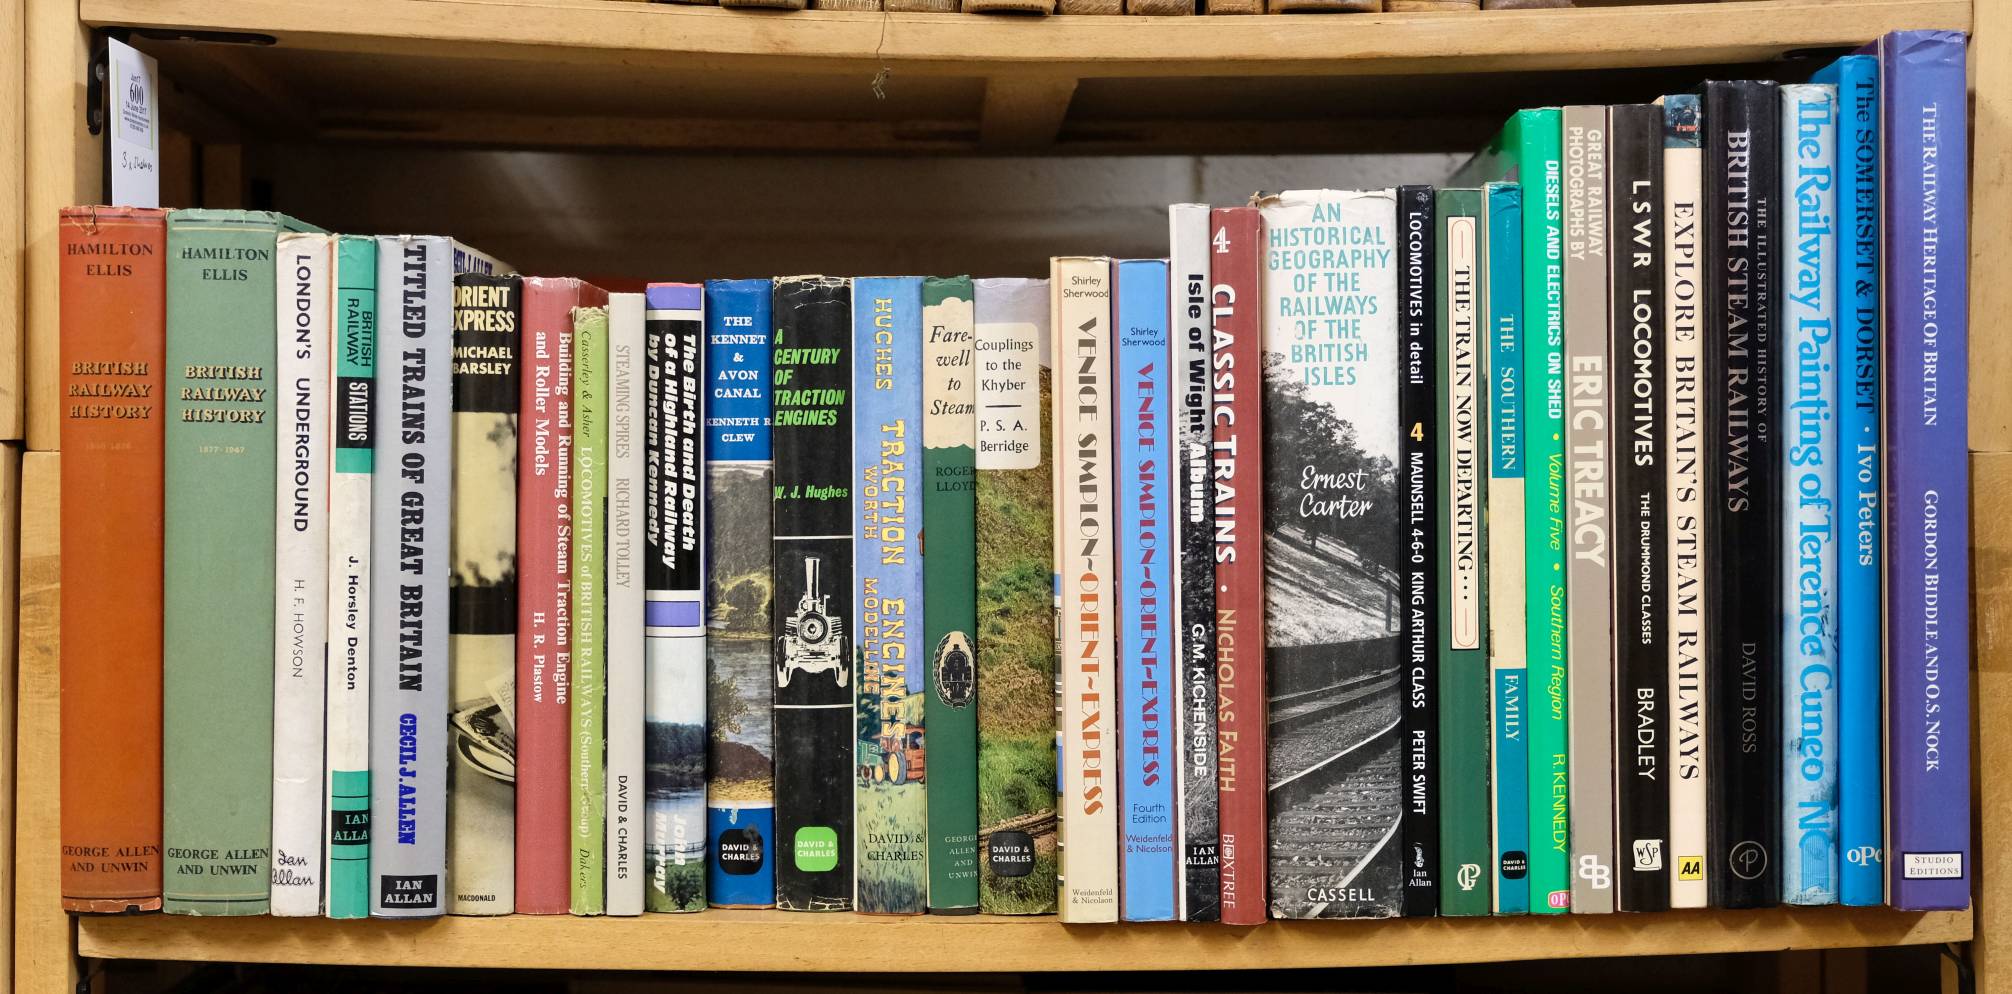 Railway. A collection of modern railway, steam and locomotive reference, including publications by